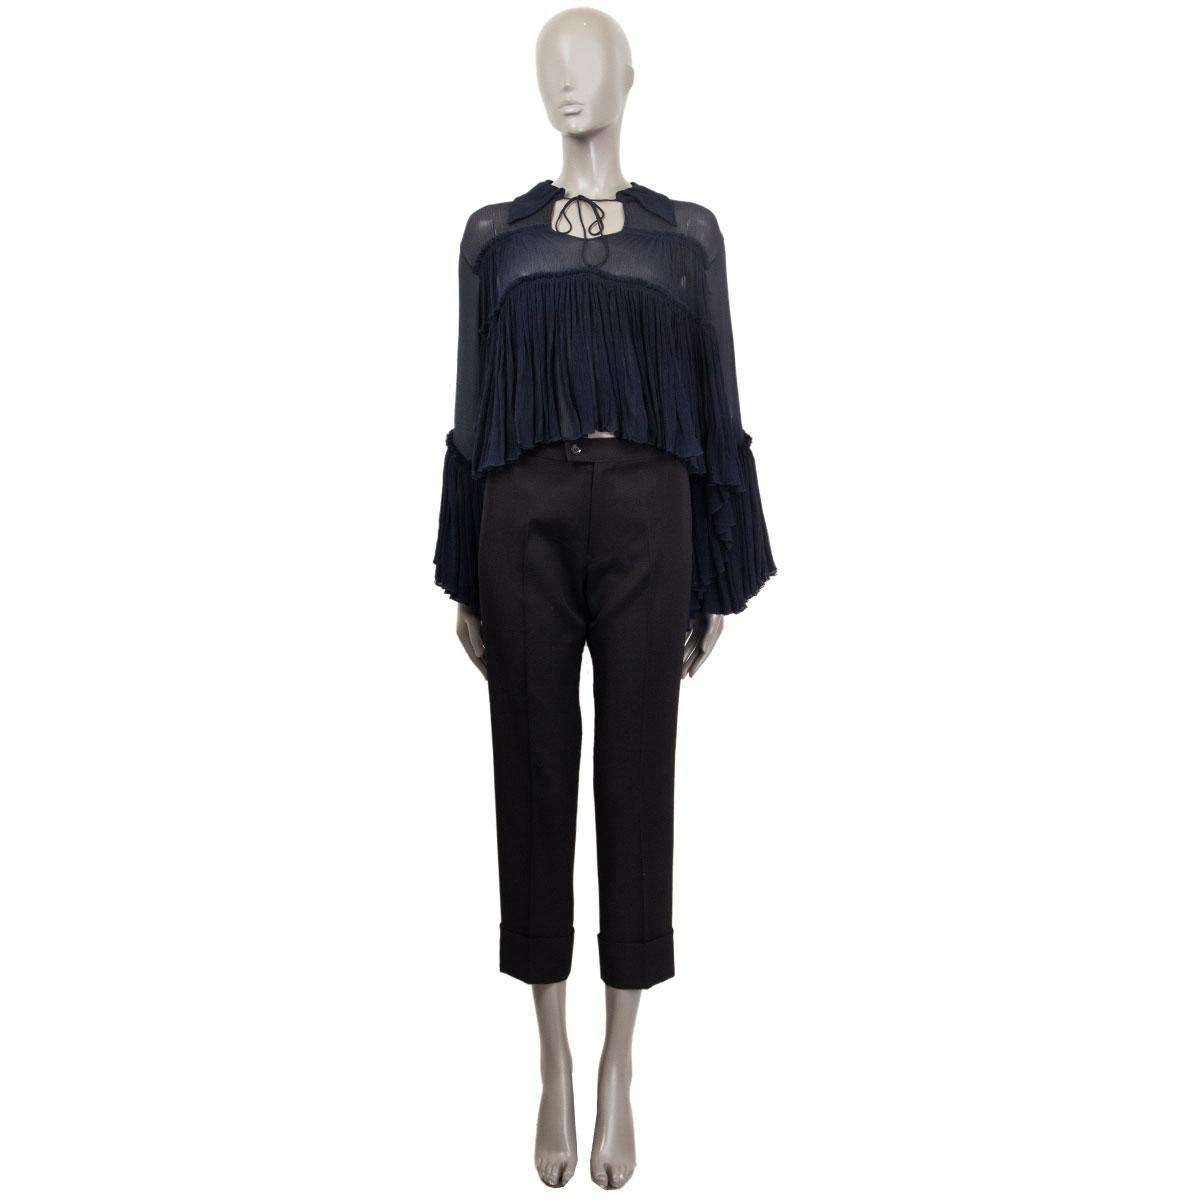 100% authentic Chloé oversized cropped poncho-sleeve blouse in sheer midnight blue silk (100% - Missing Tag) with point collar and tie accent at front. Blouse features ruffle accents throughout. Has been worn and is in excellent condition.